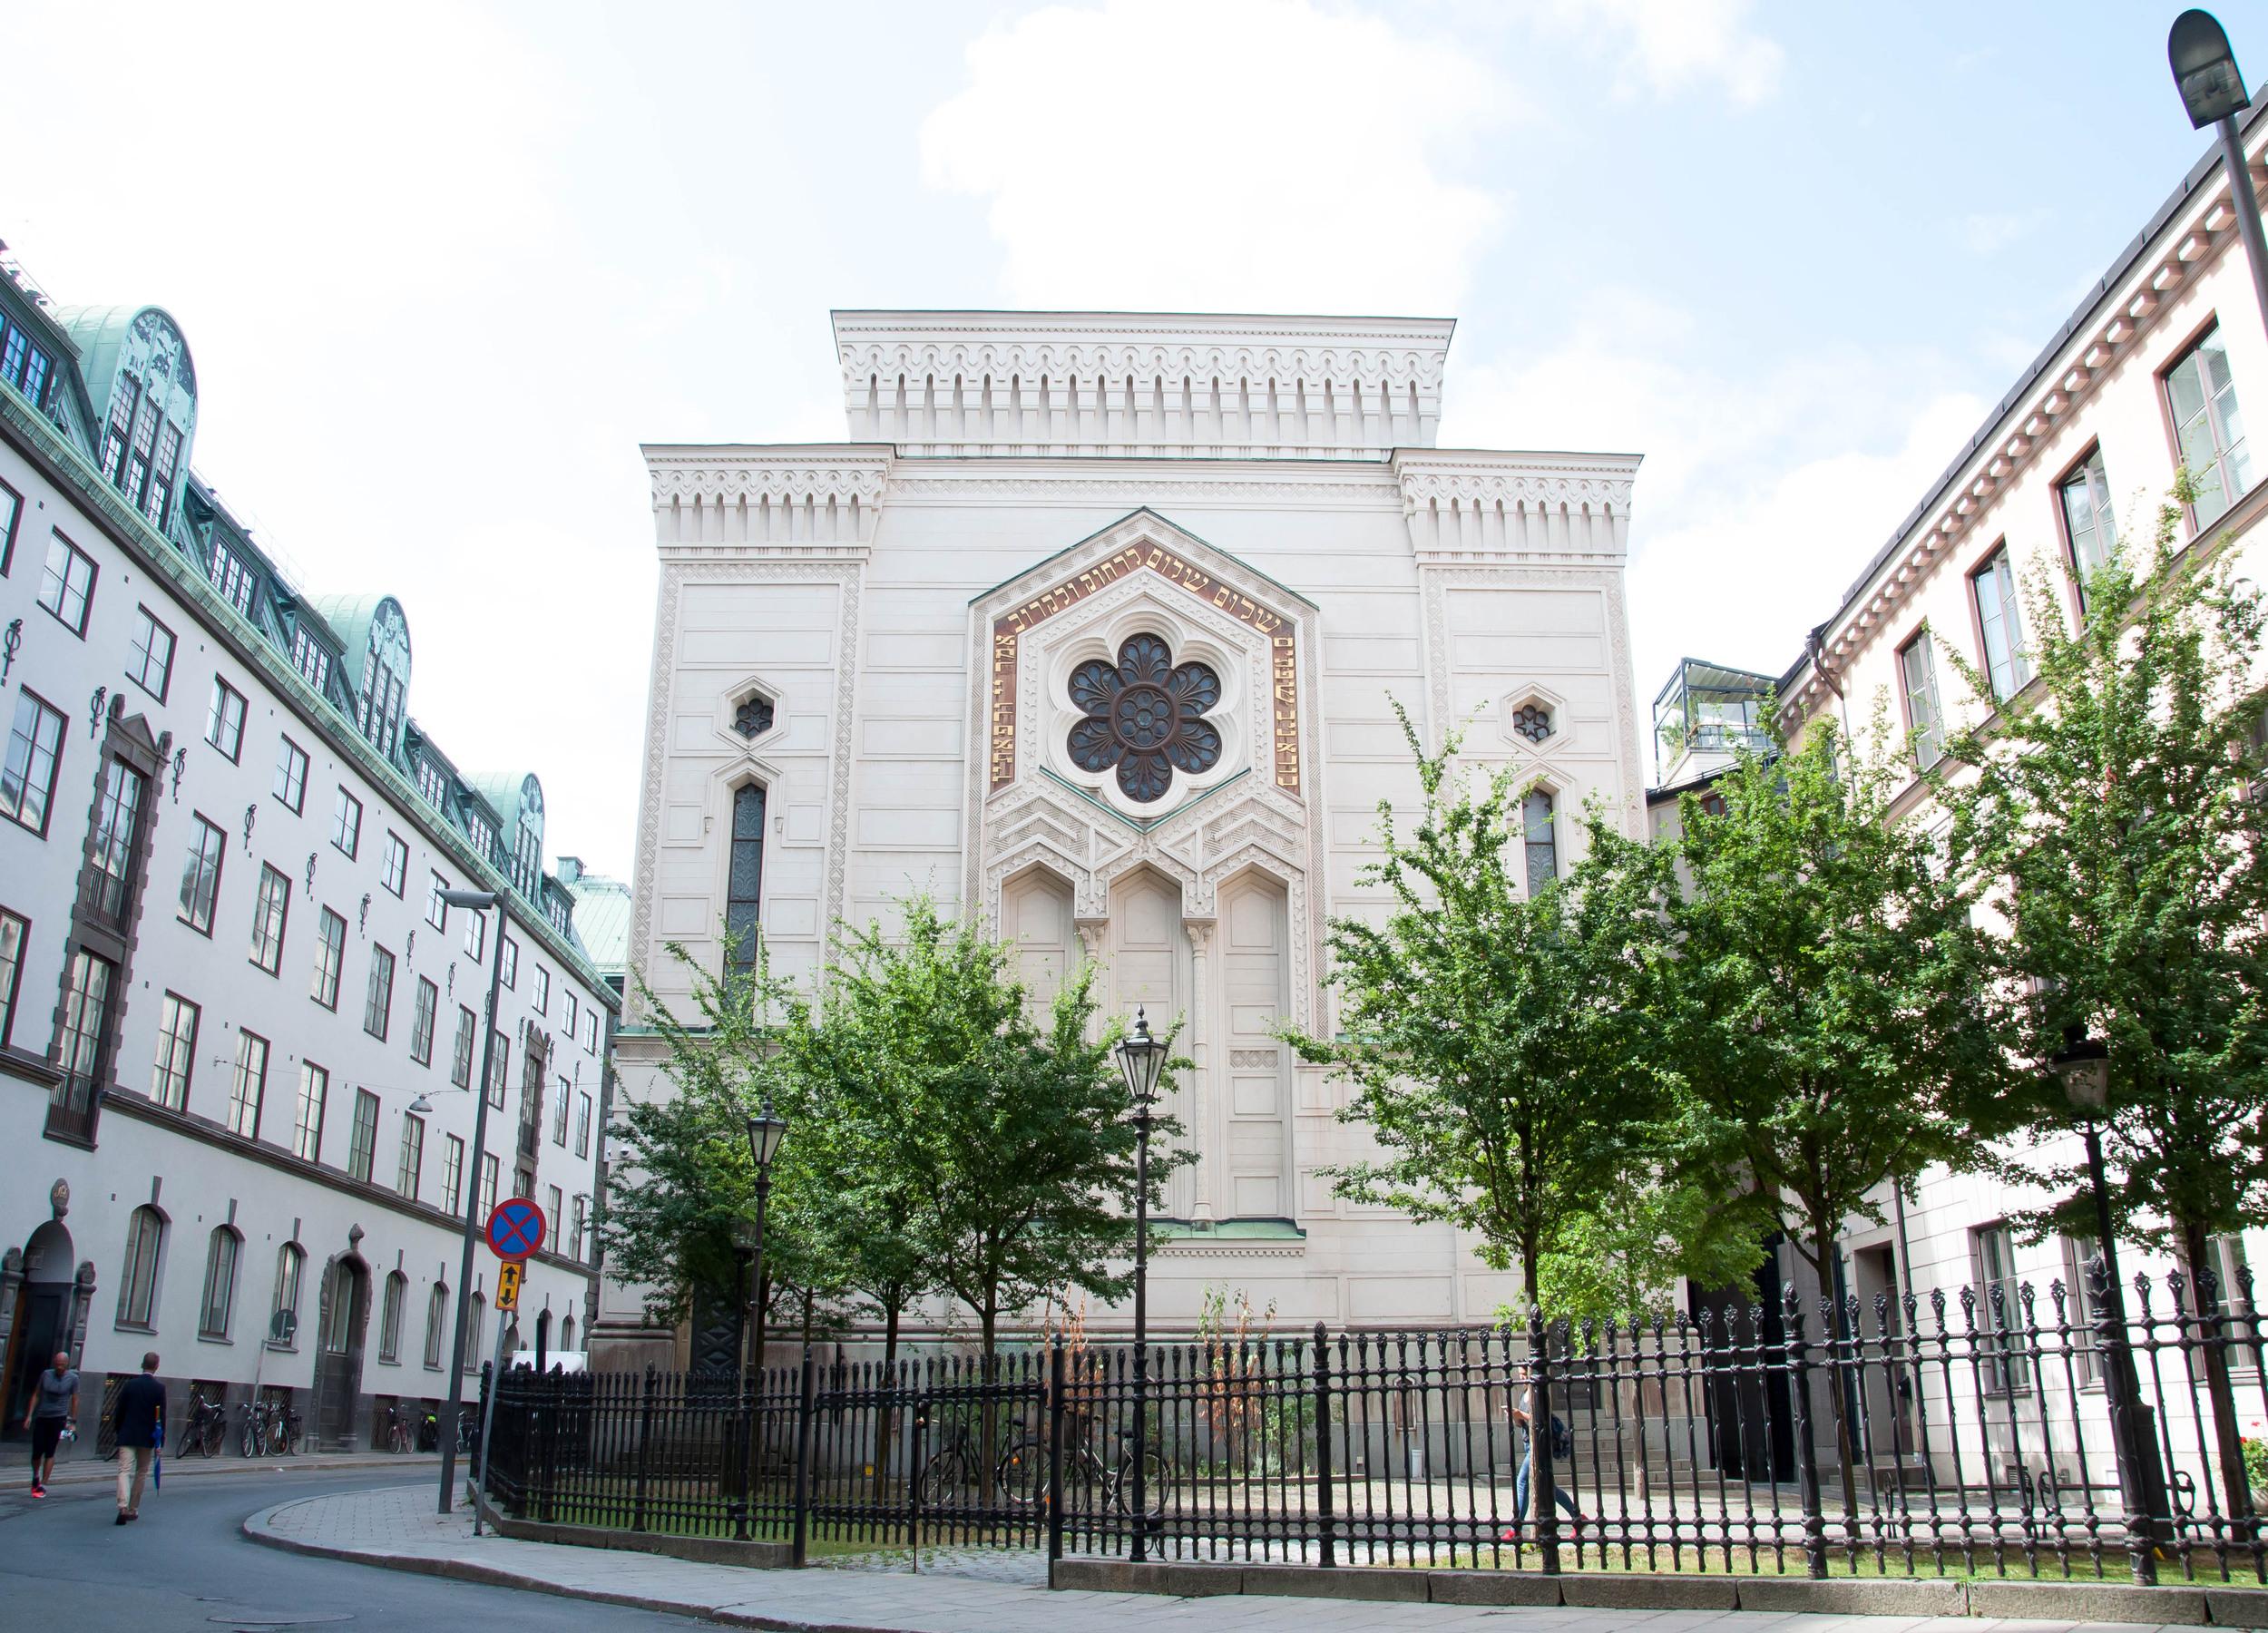 The synagogue in Stockholm seen from the outside, some trees in front of it.